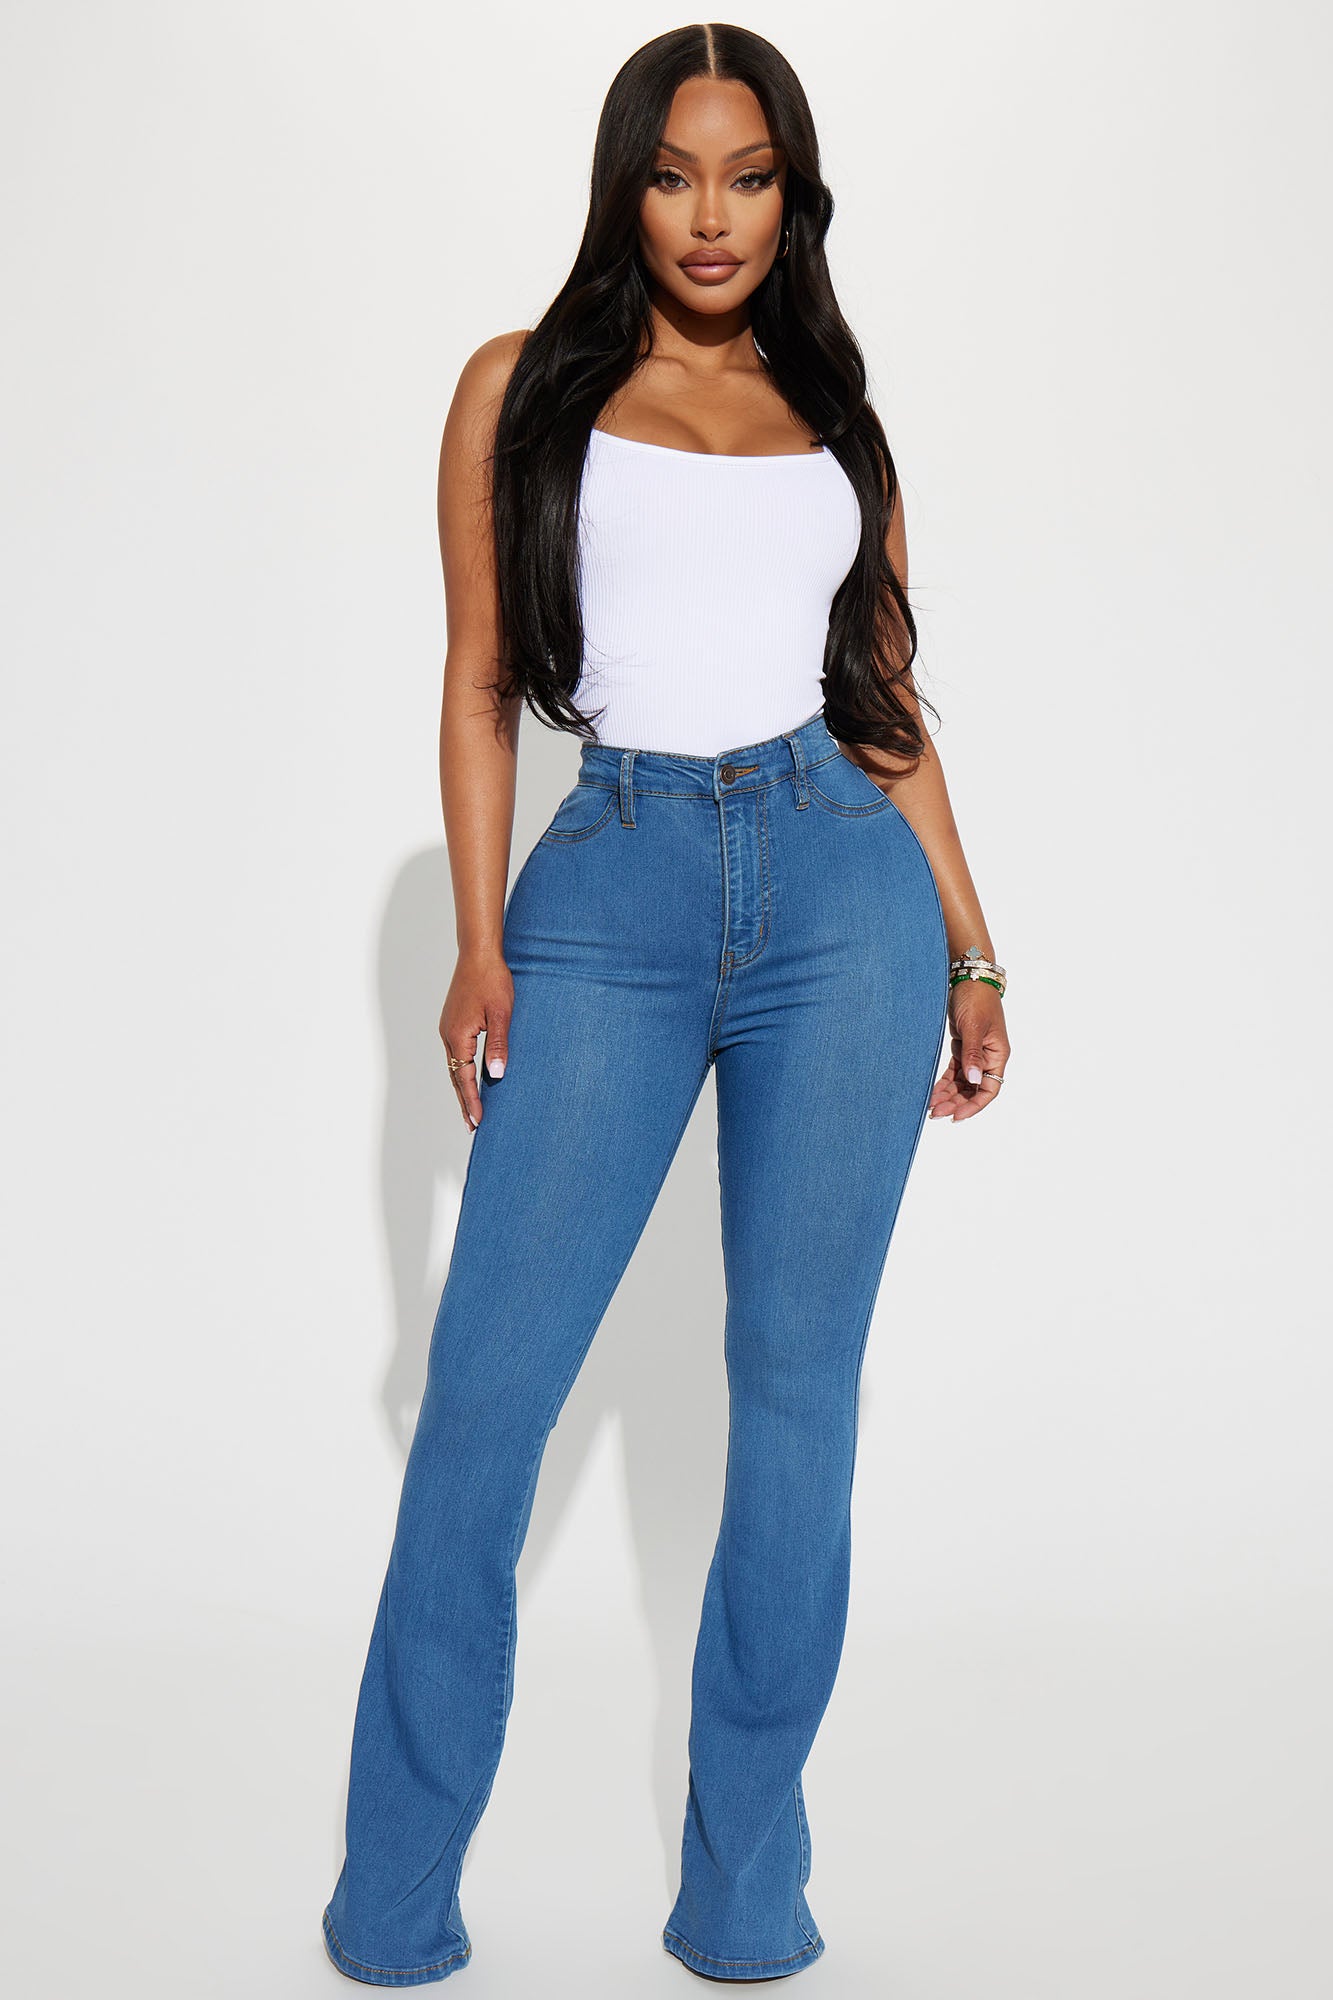 Only The Best Vibes Bell Bottom Jeans - Medium Blue Wash, Fashion Nova,  Jeans